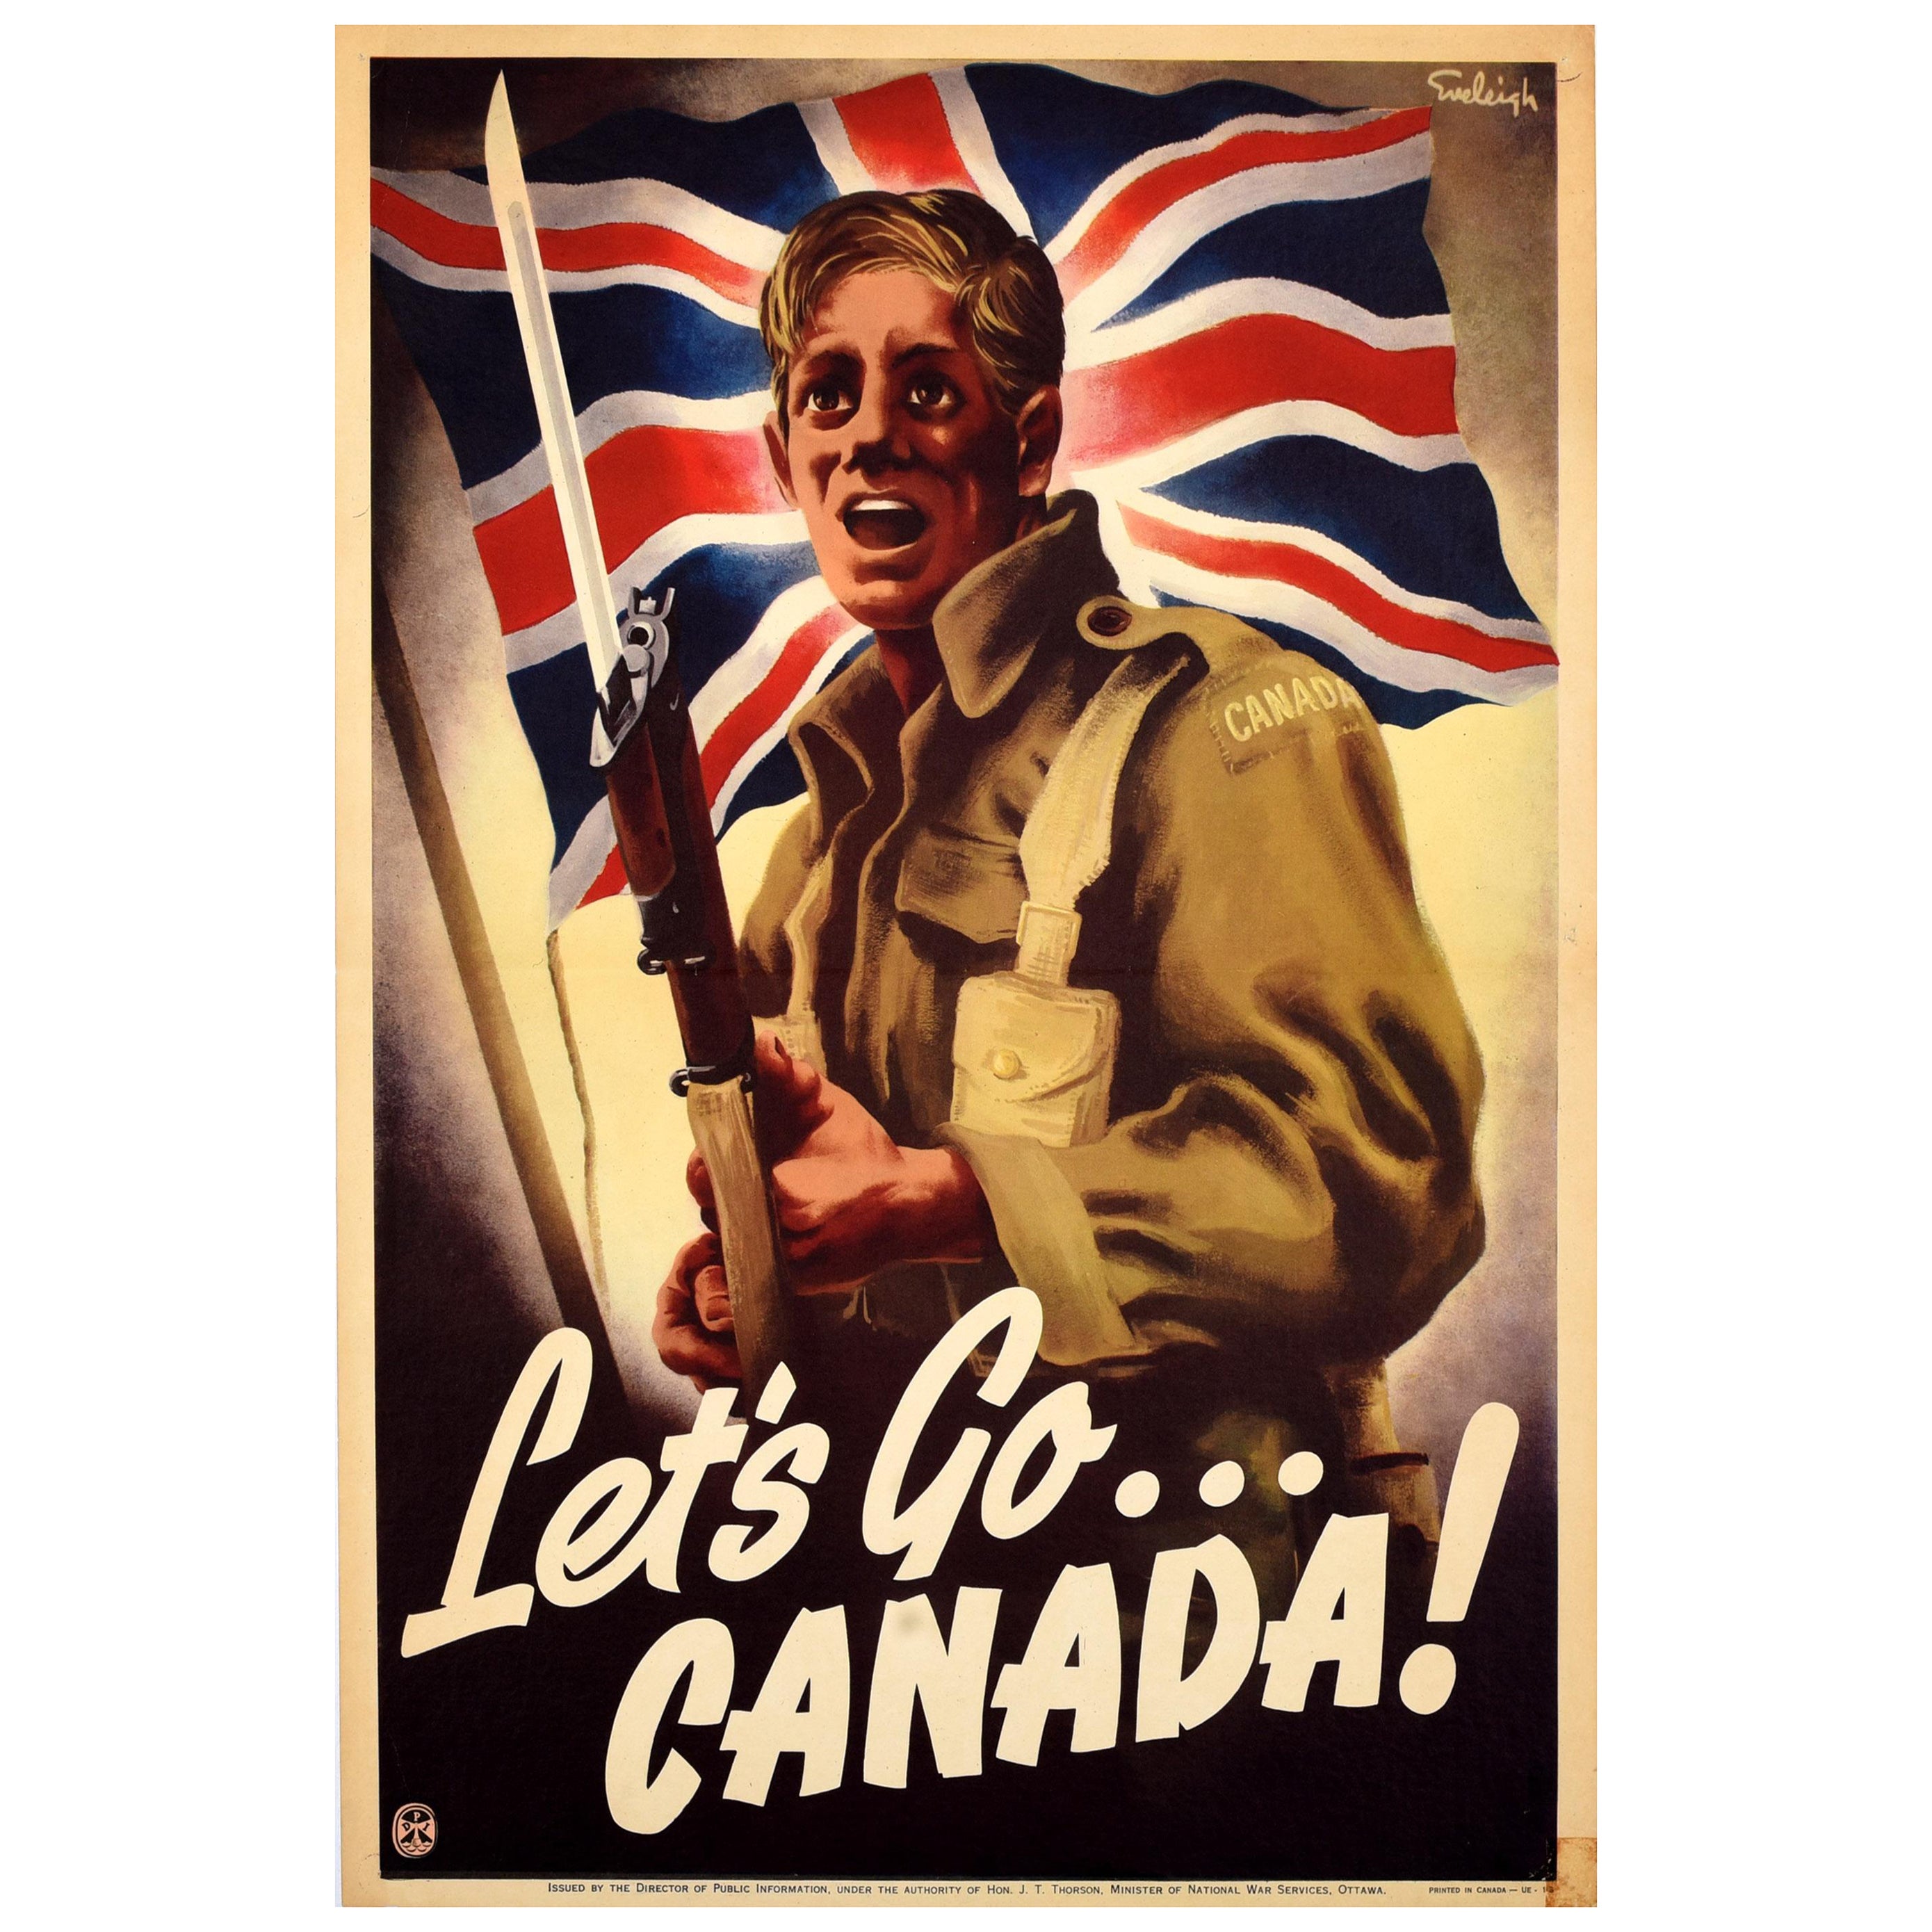 Original Vintage Canadian World War Two Propaganda Poster WWII Lets Go Canada For Sale